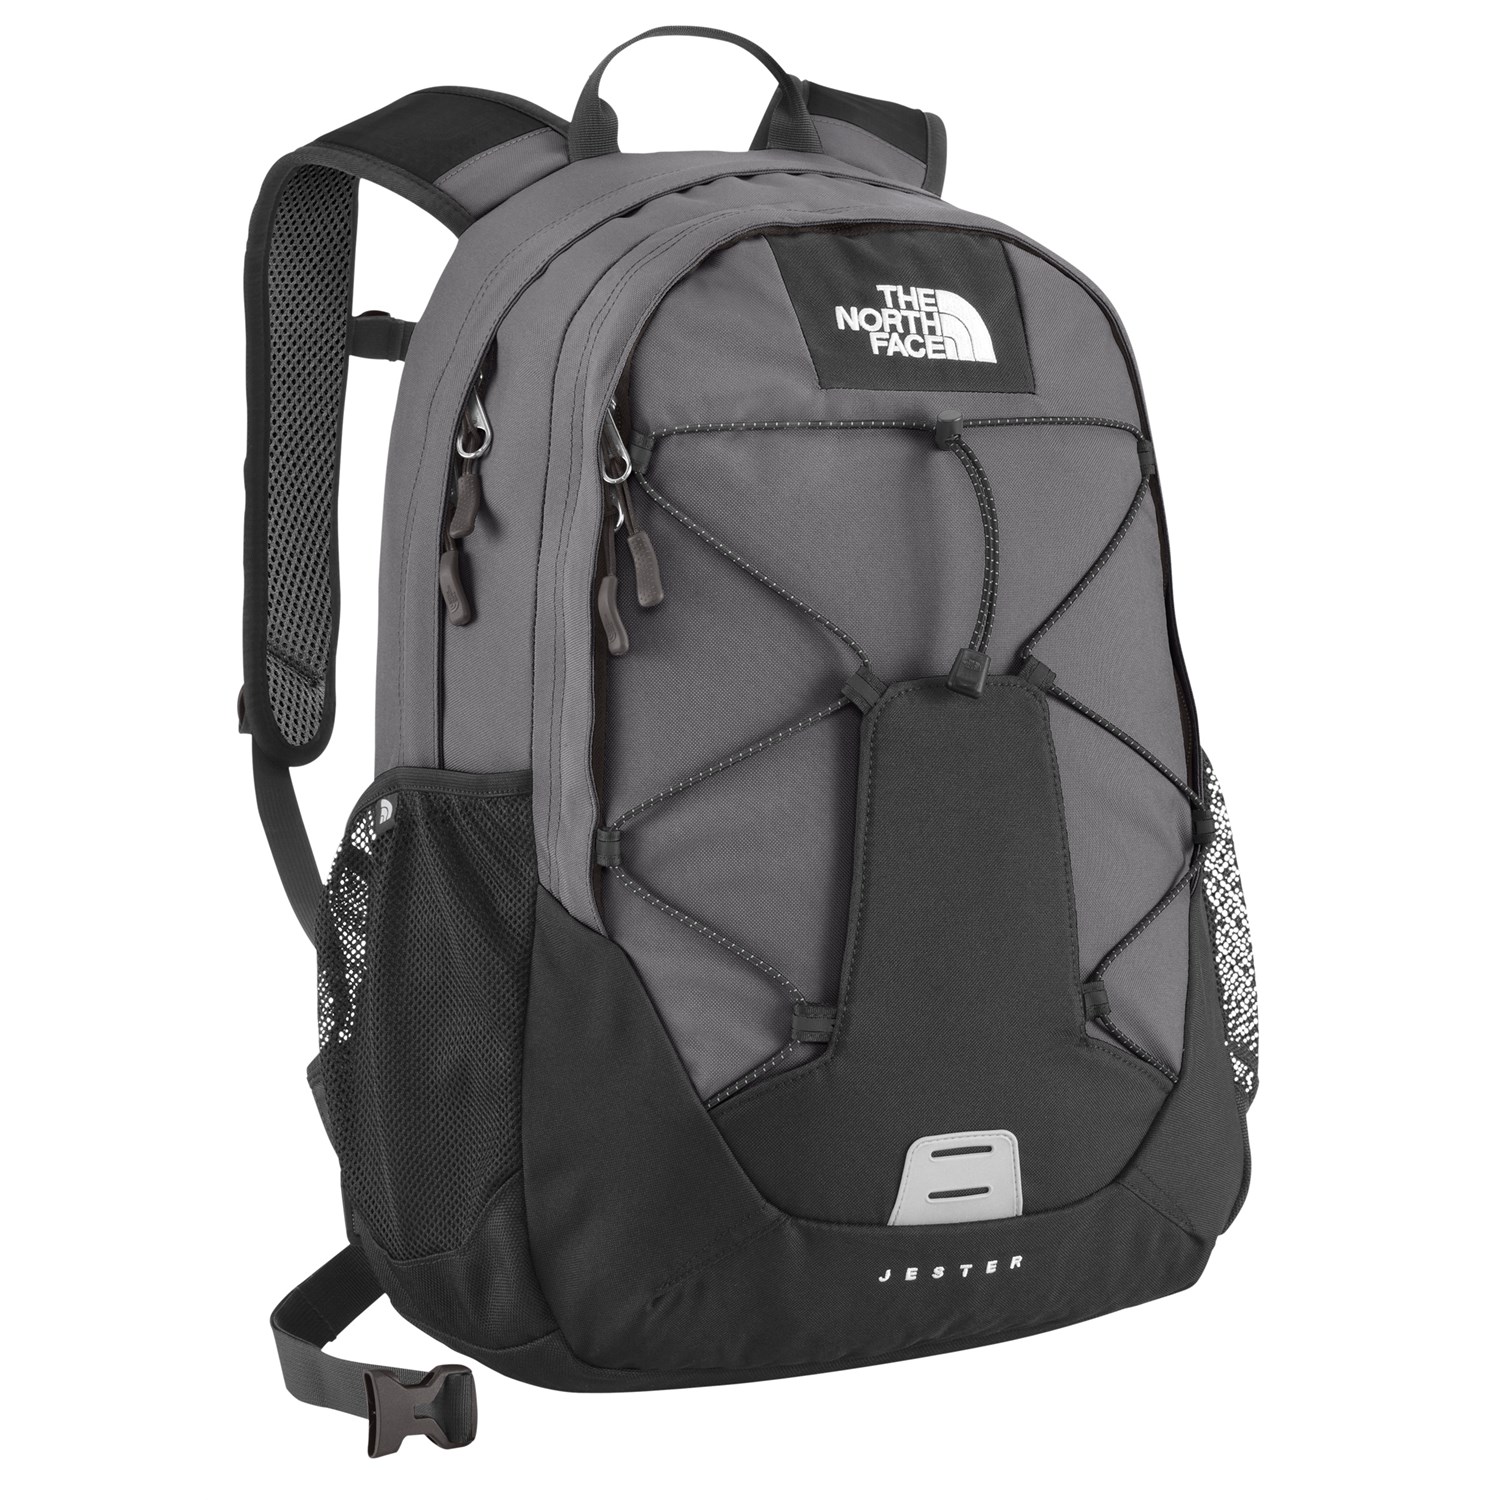 The North Face Jester Backpack | evo